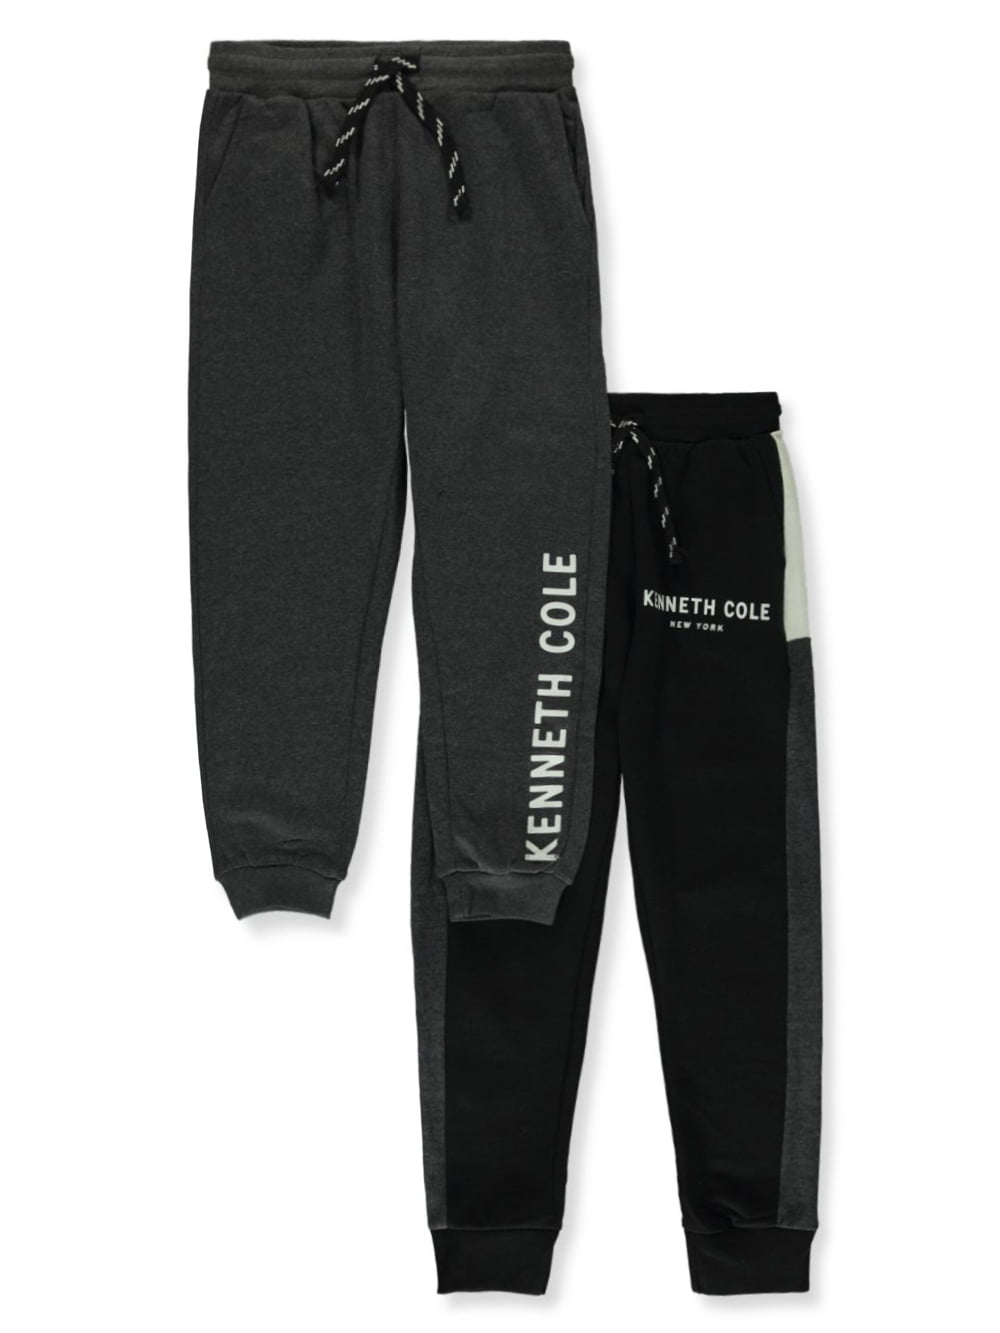 Kenneth Cole Boys' 2-Pack Fleece Joggers - black/charcoal gray, 2t ...